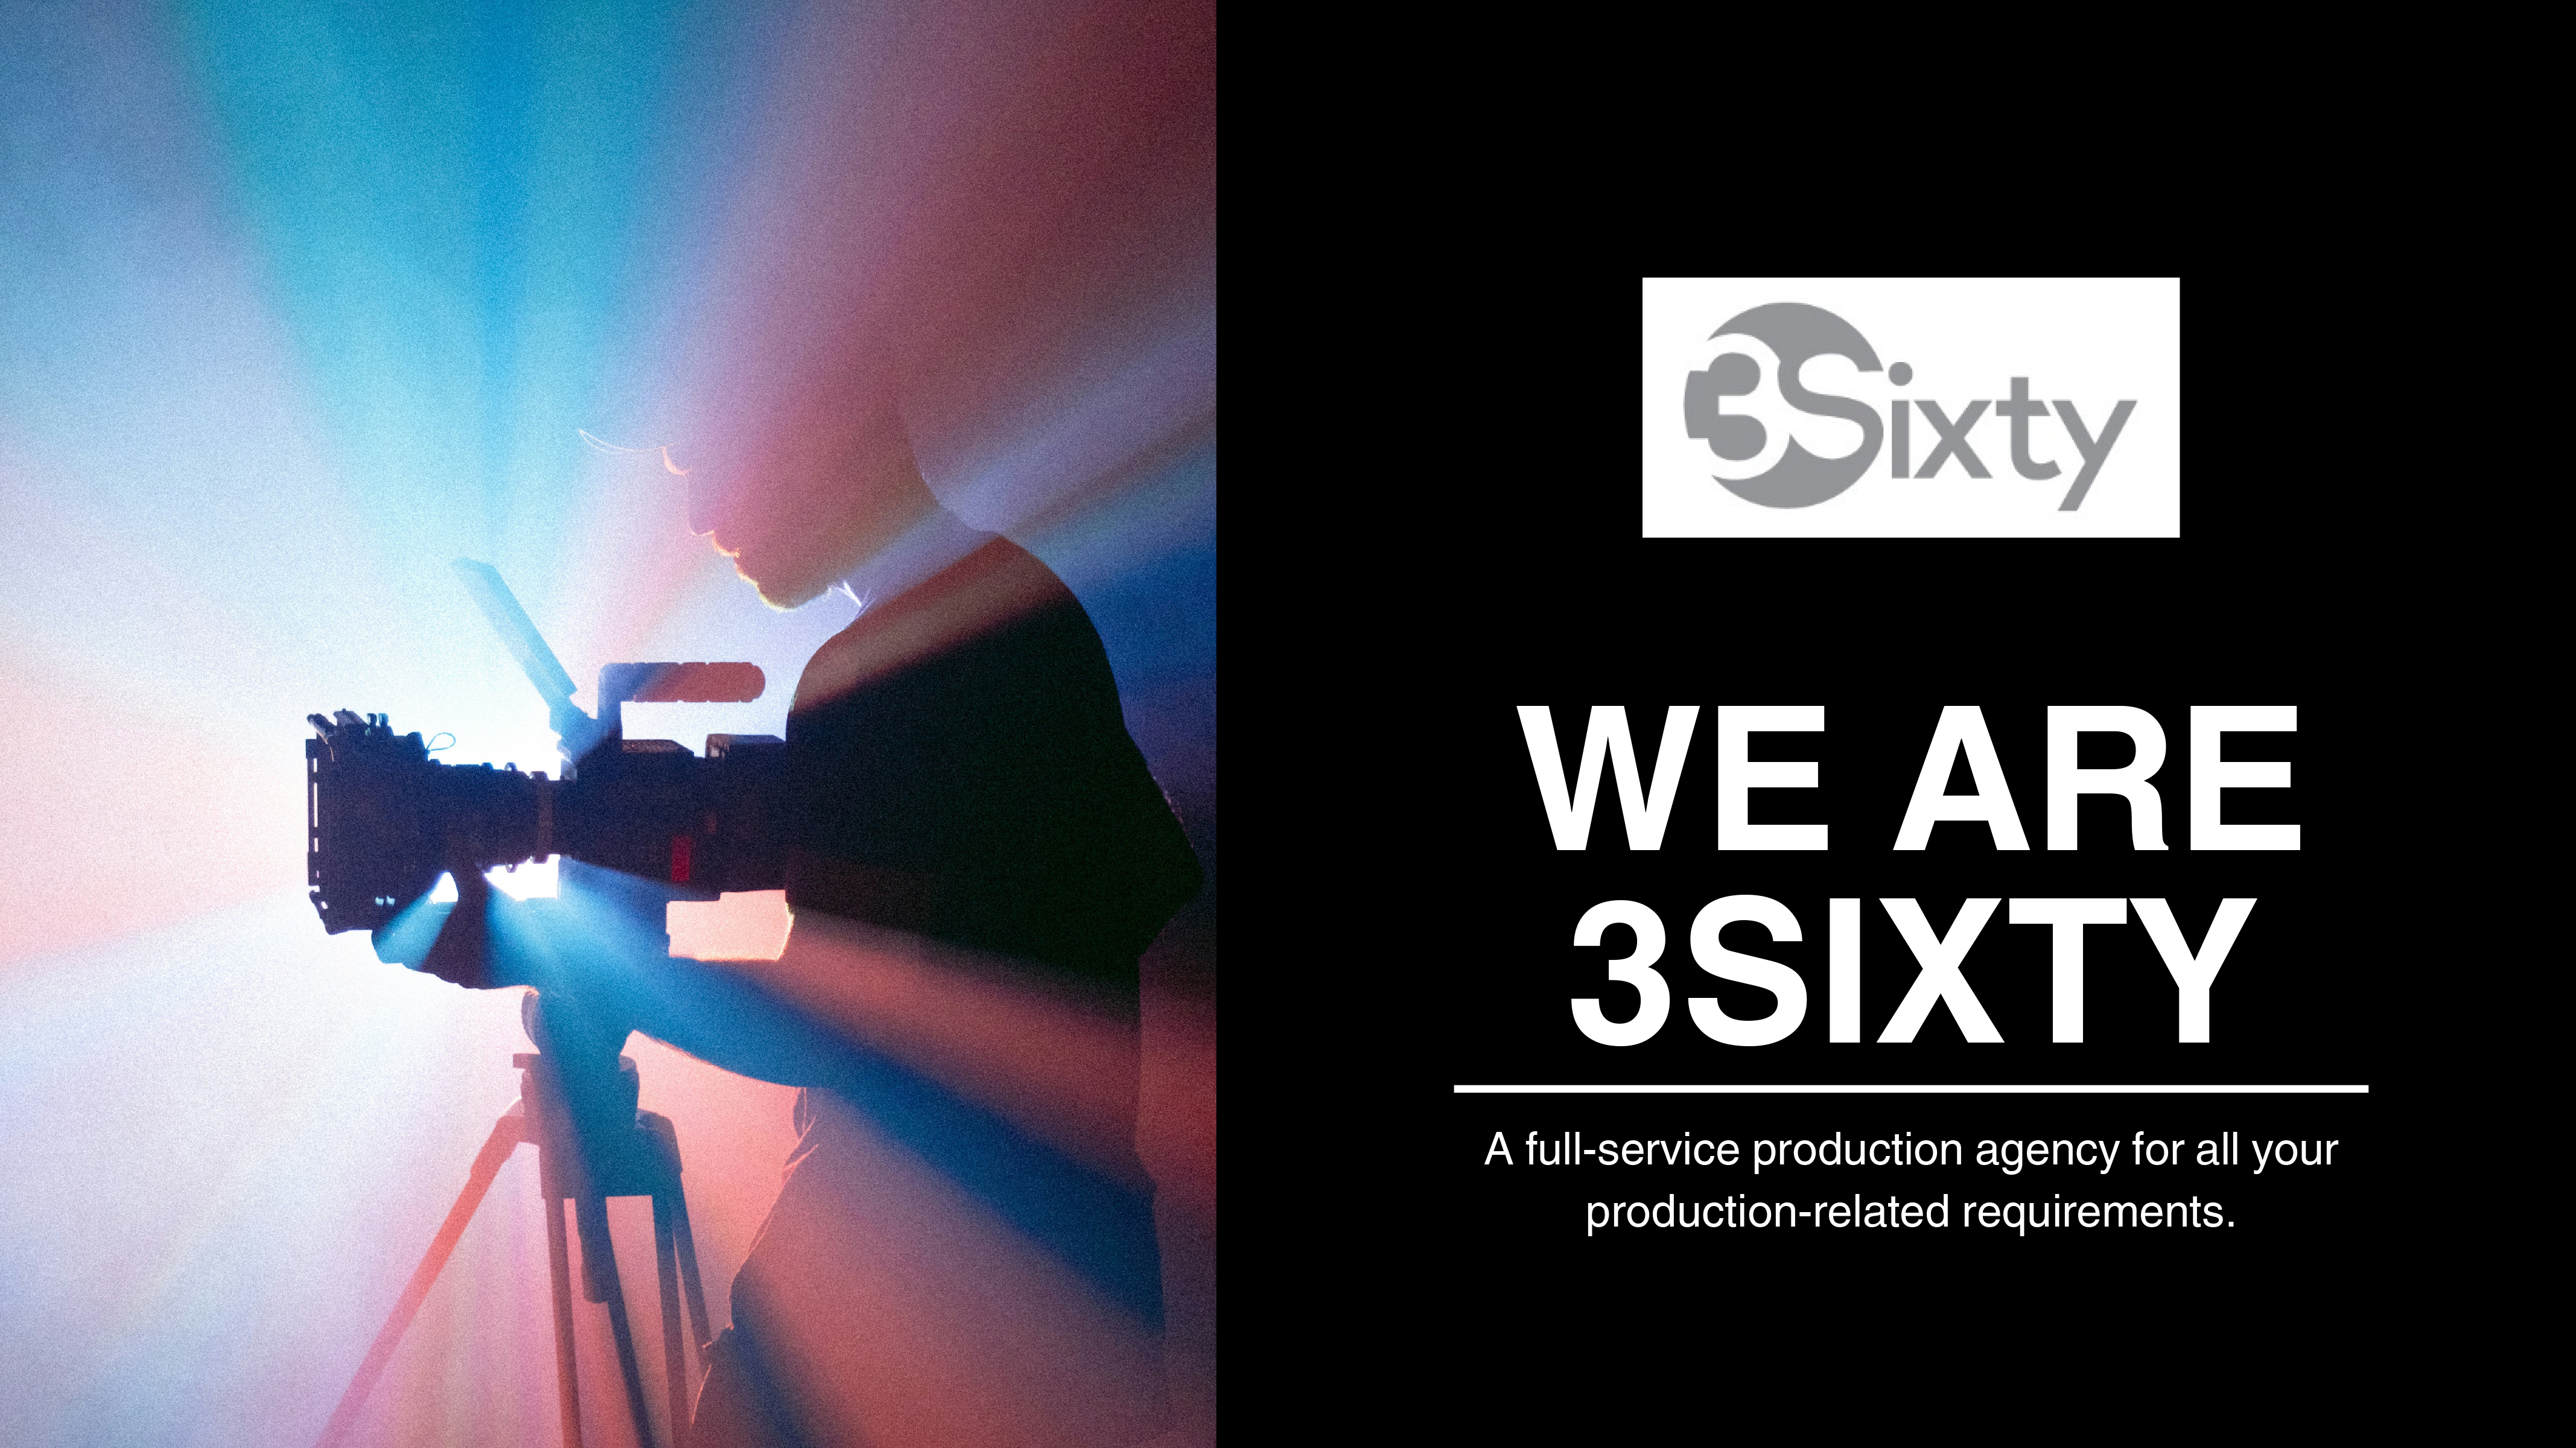 We Are 3Sixty